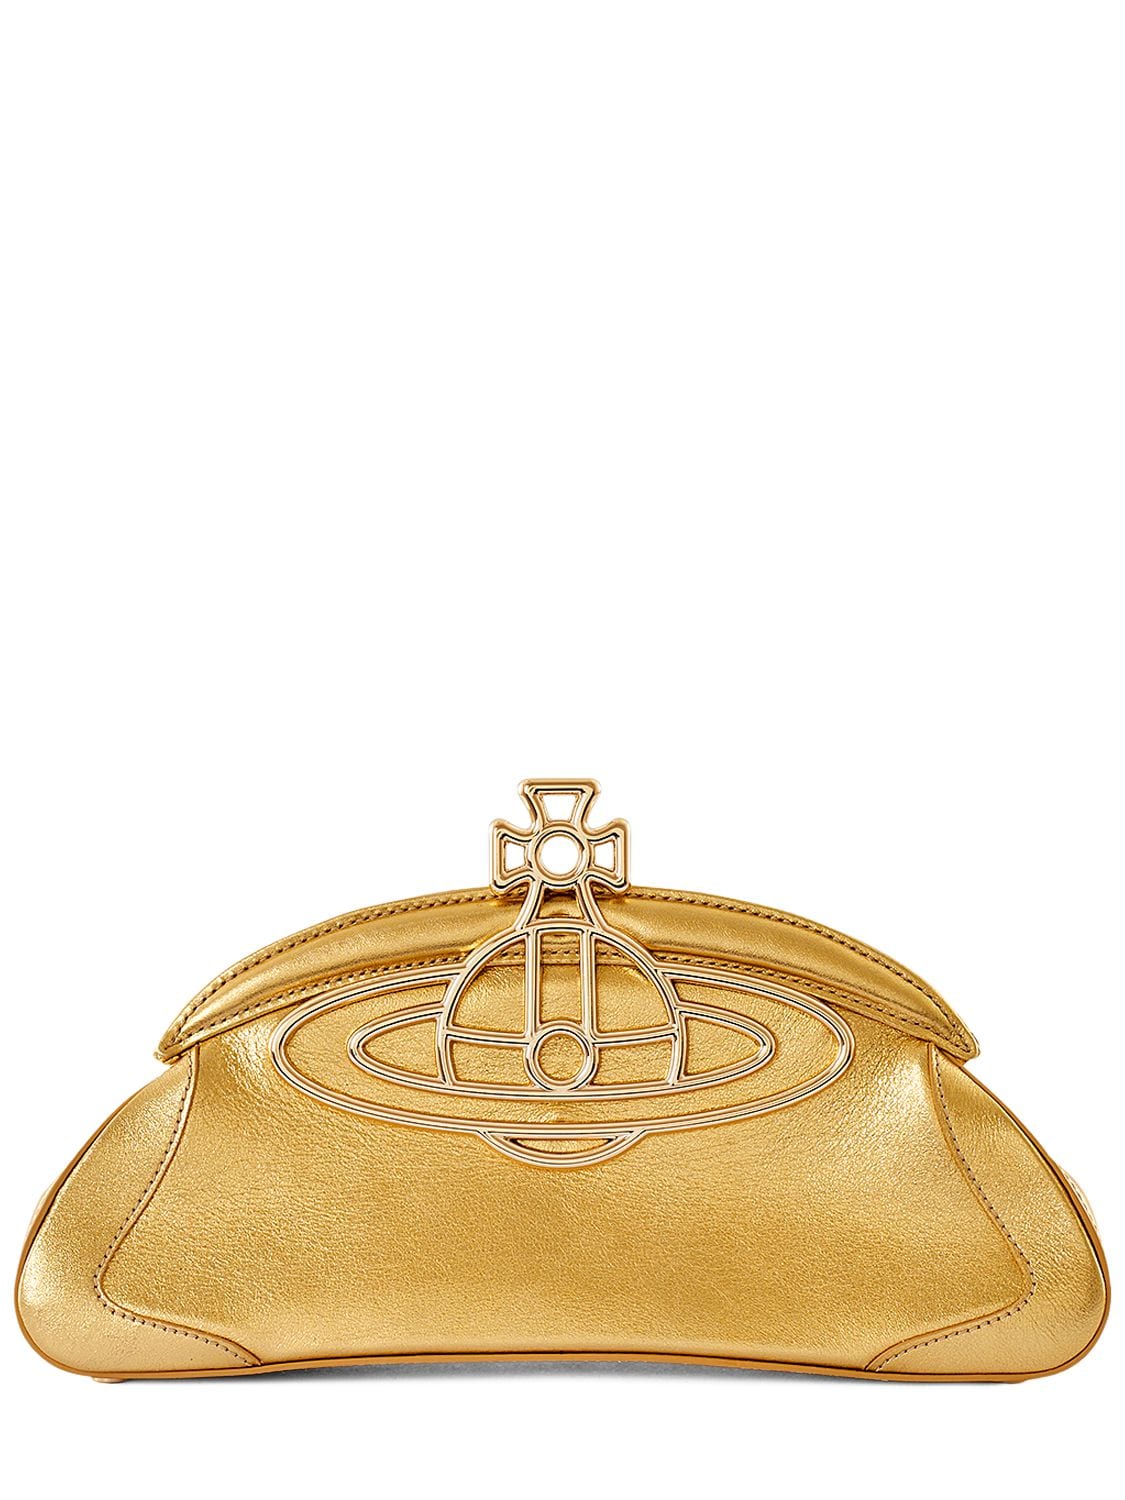 Vivienne Westwood Amber Leather Clutch In Gold